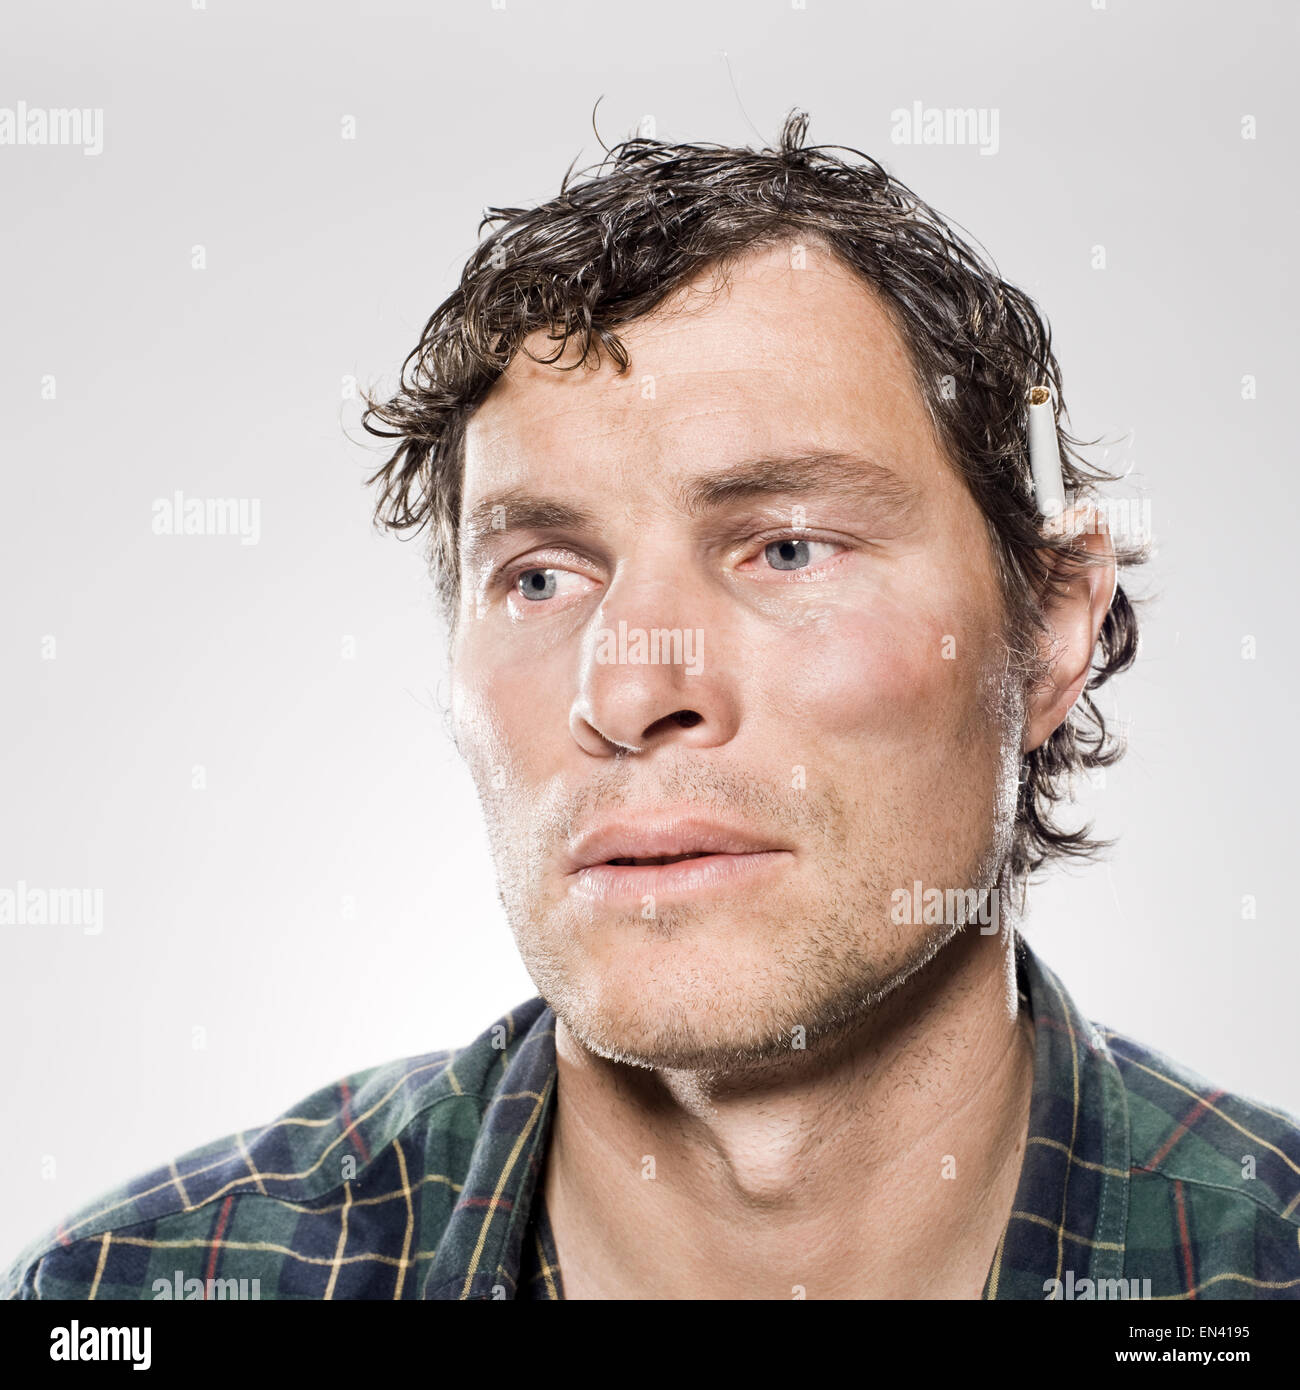 White trash man with a cigarette behind his ear Stock Photo